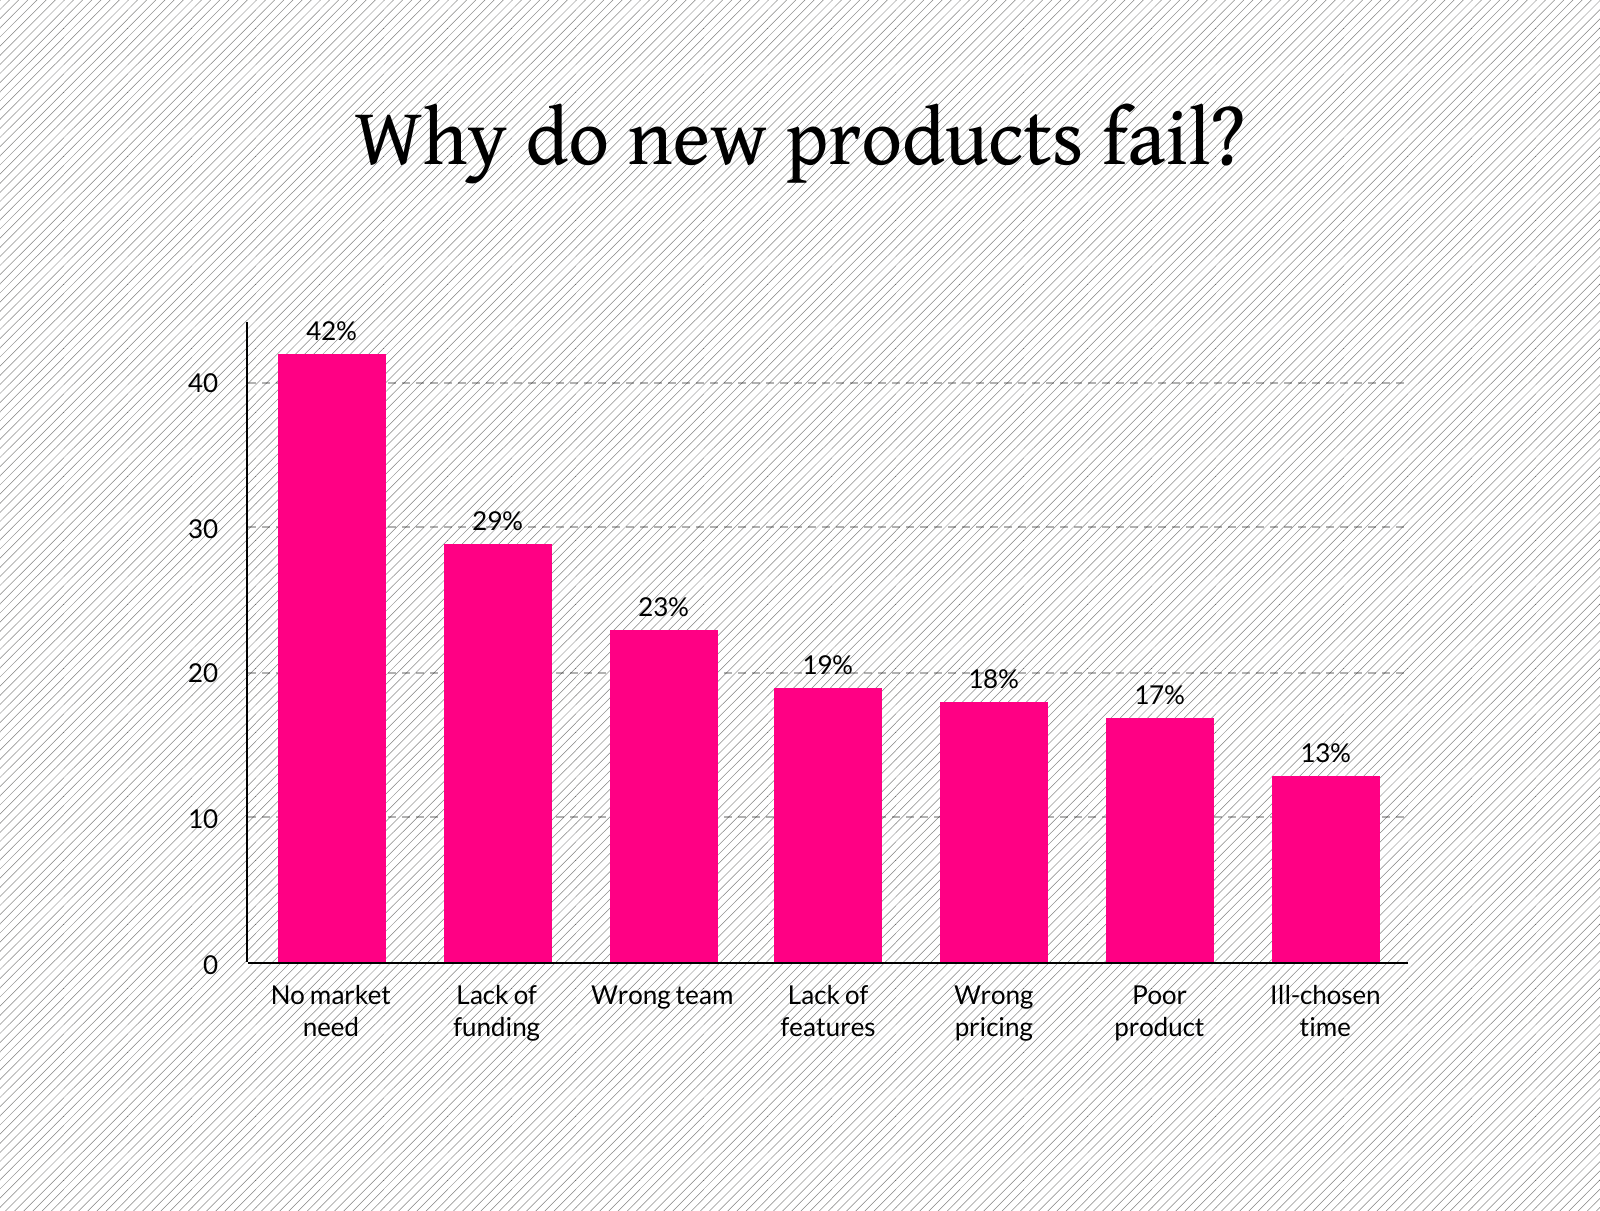 Why do new software products fail?